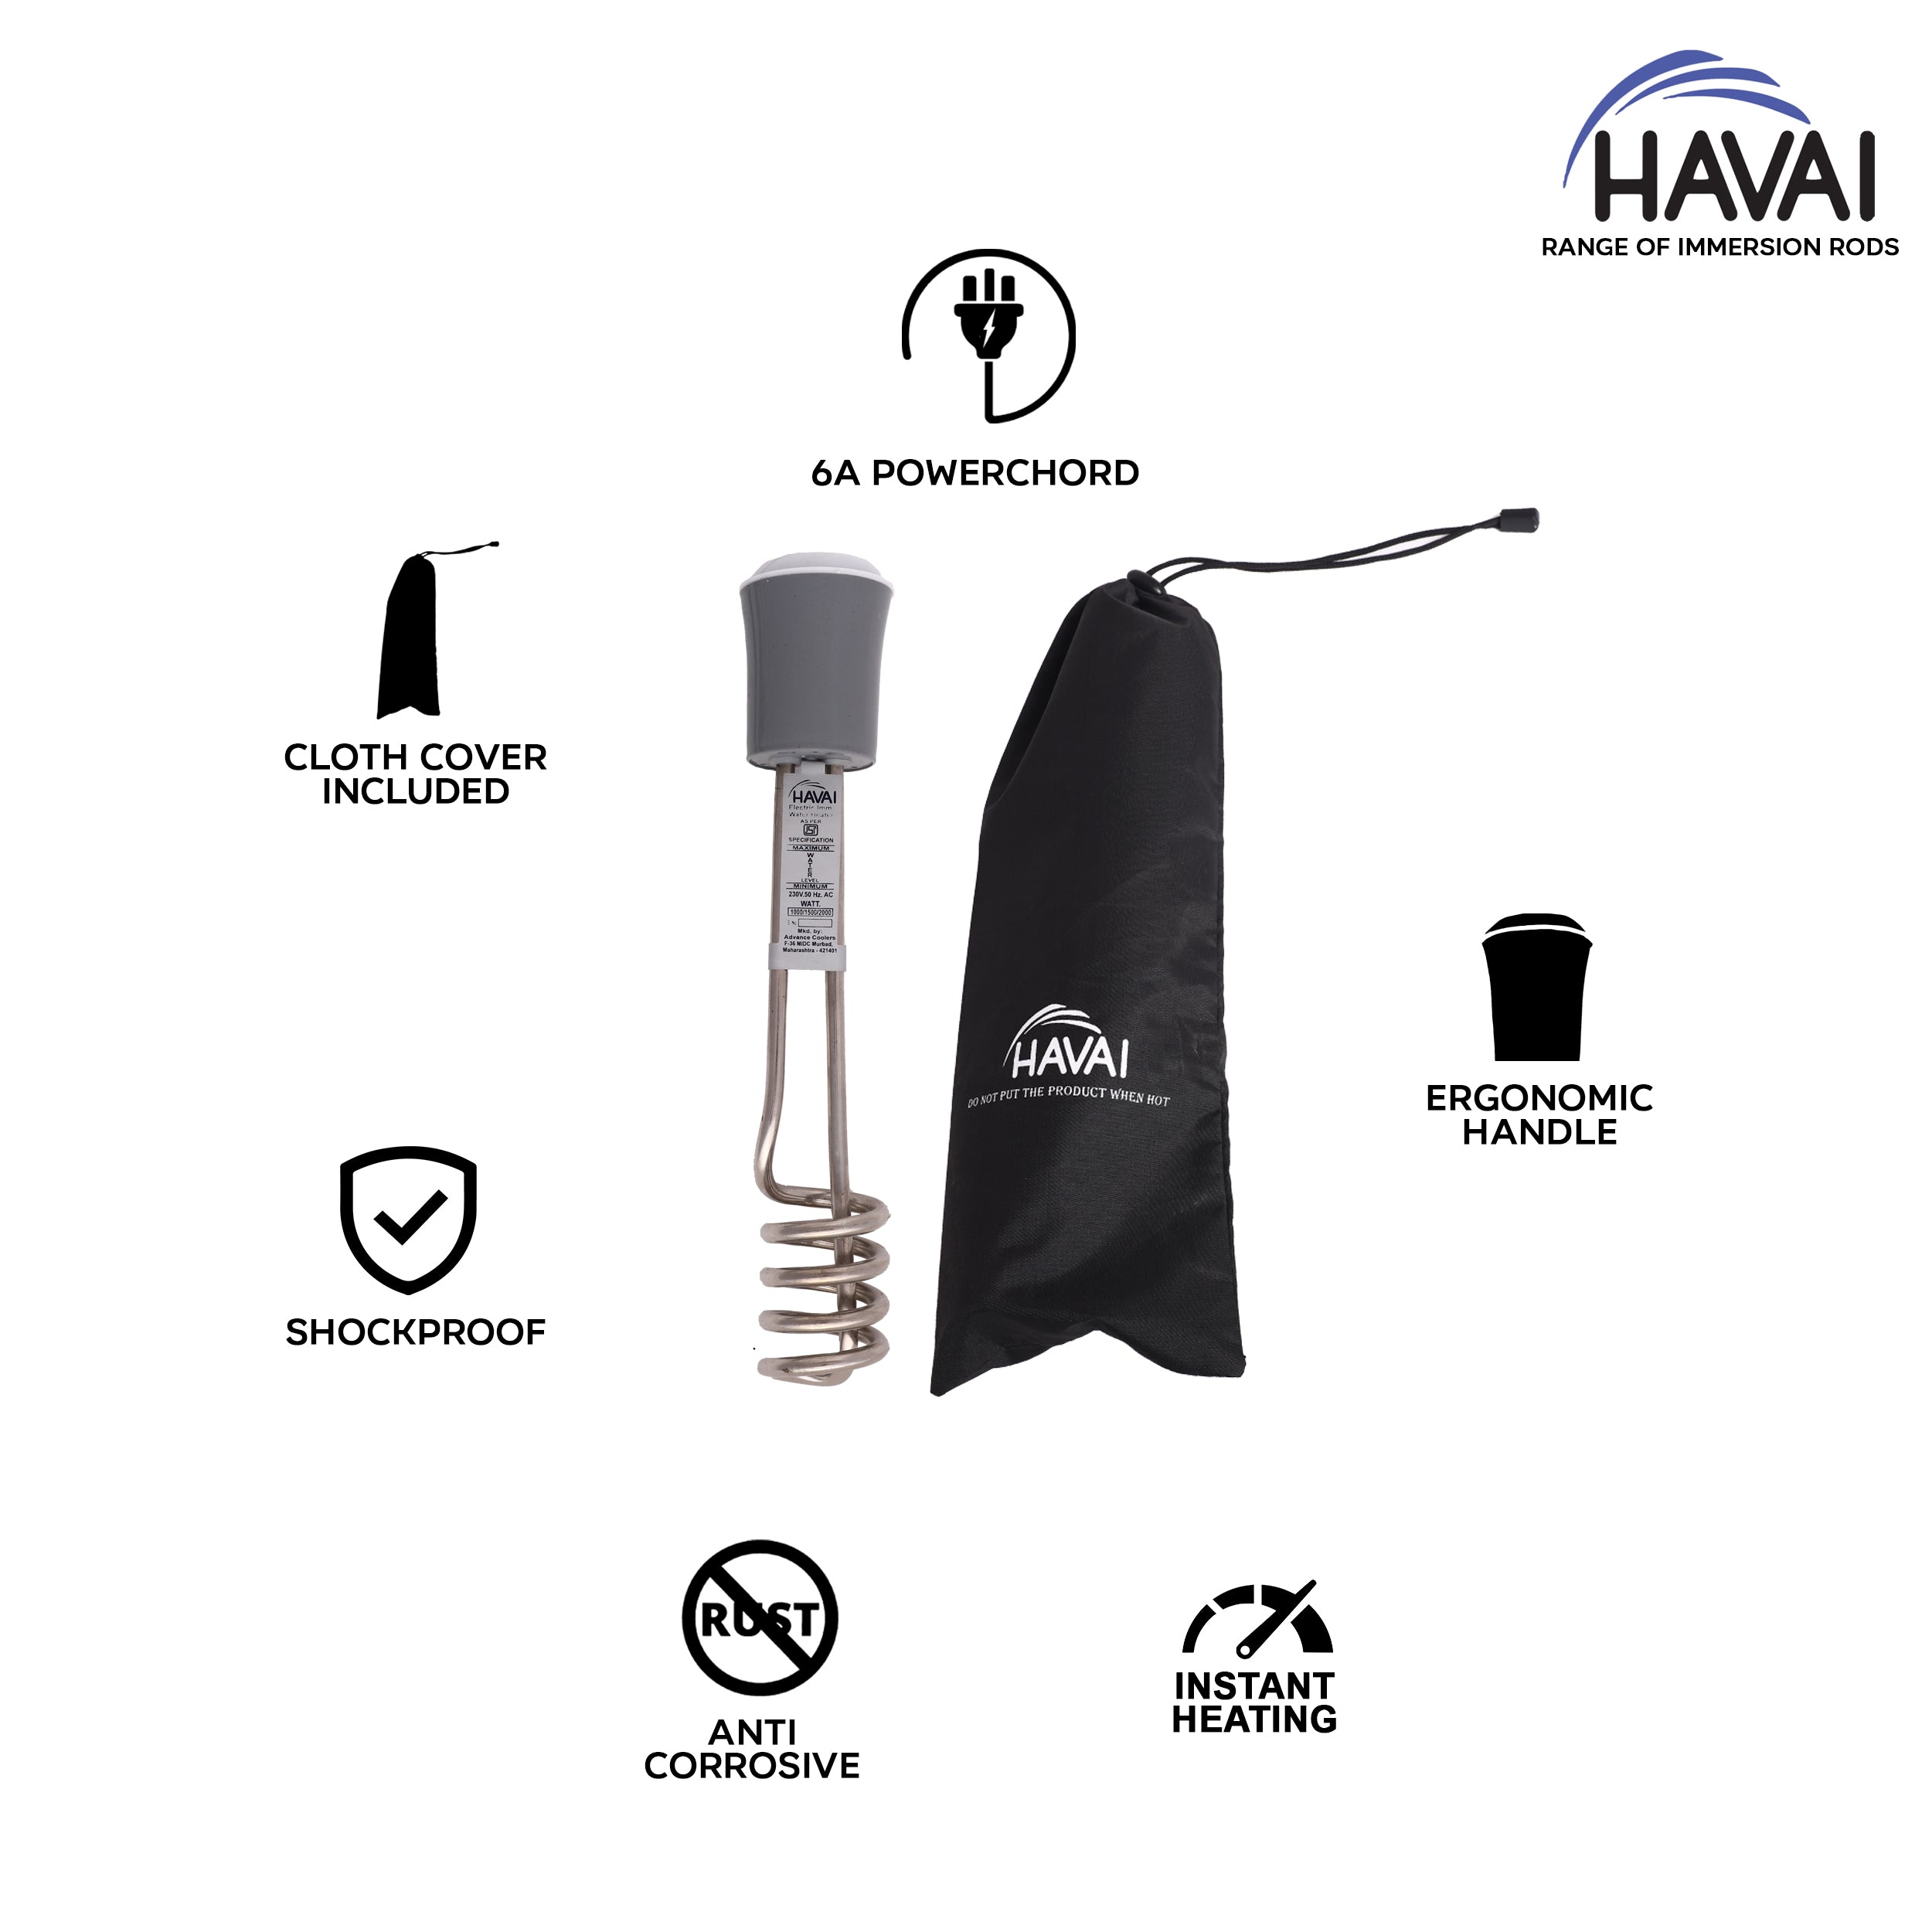 HAVAI Immersion Rod with Cover - Metal, Grey and White, 1500 W